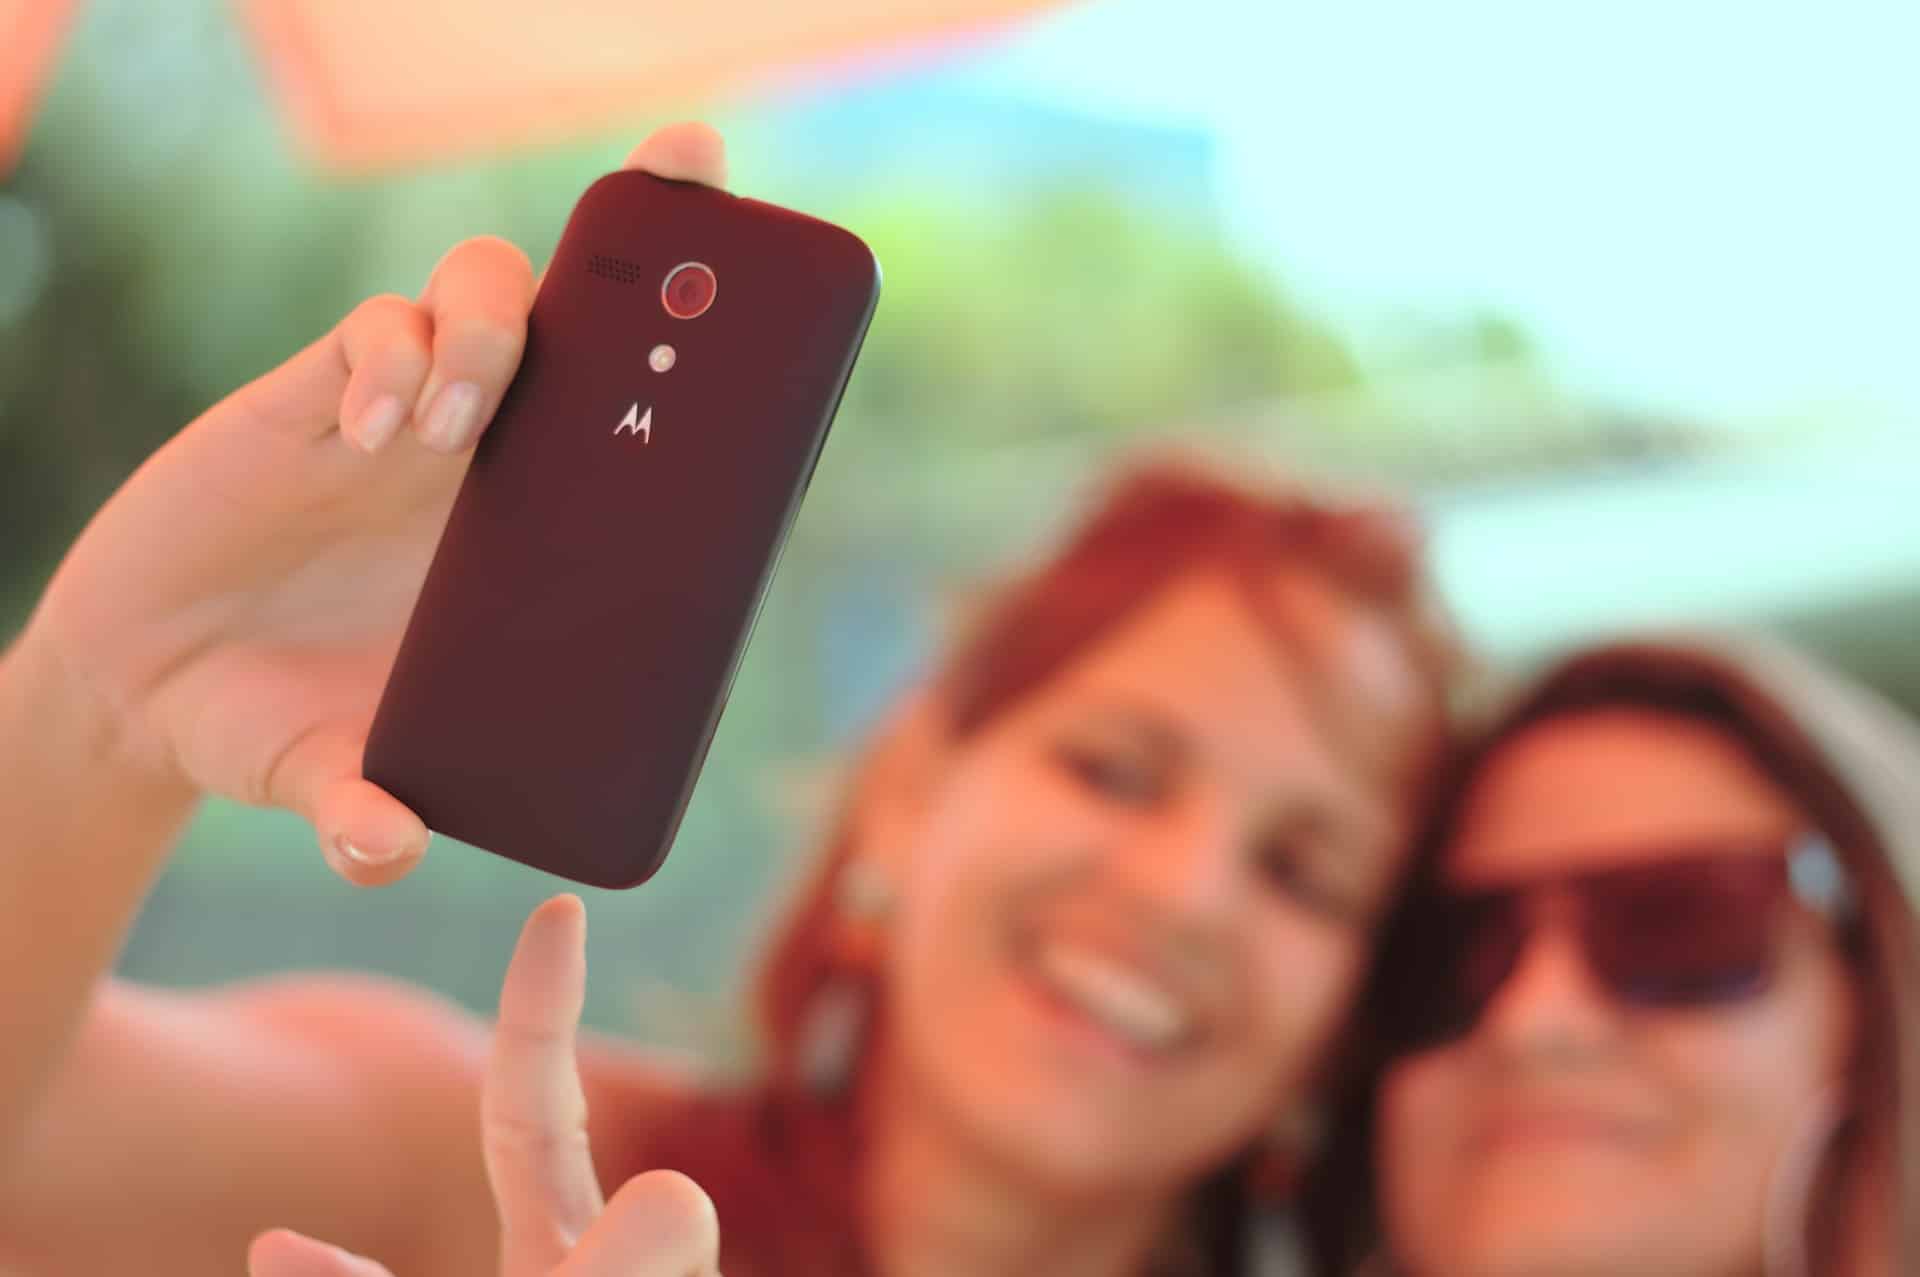 Mastercard’s app that replaces passwords with selfies is coming this year